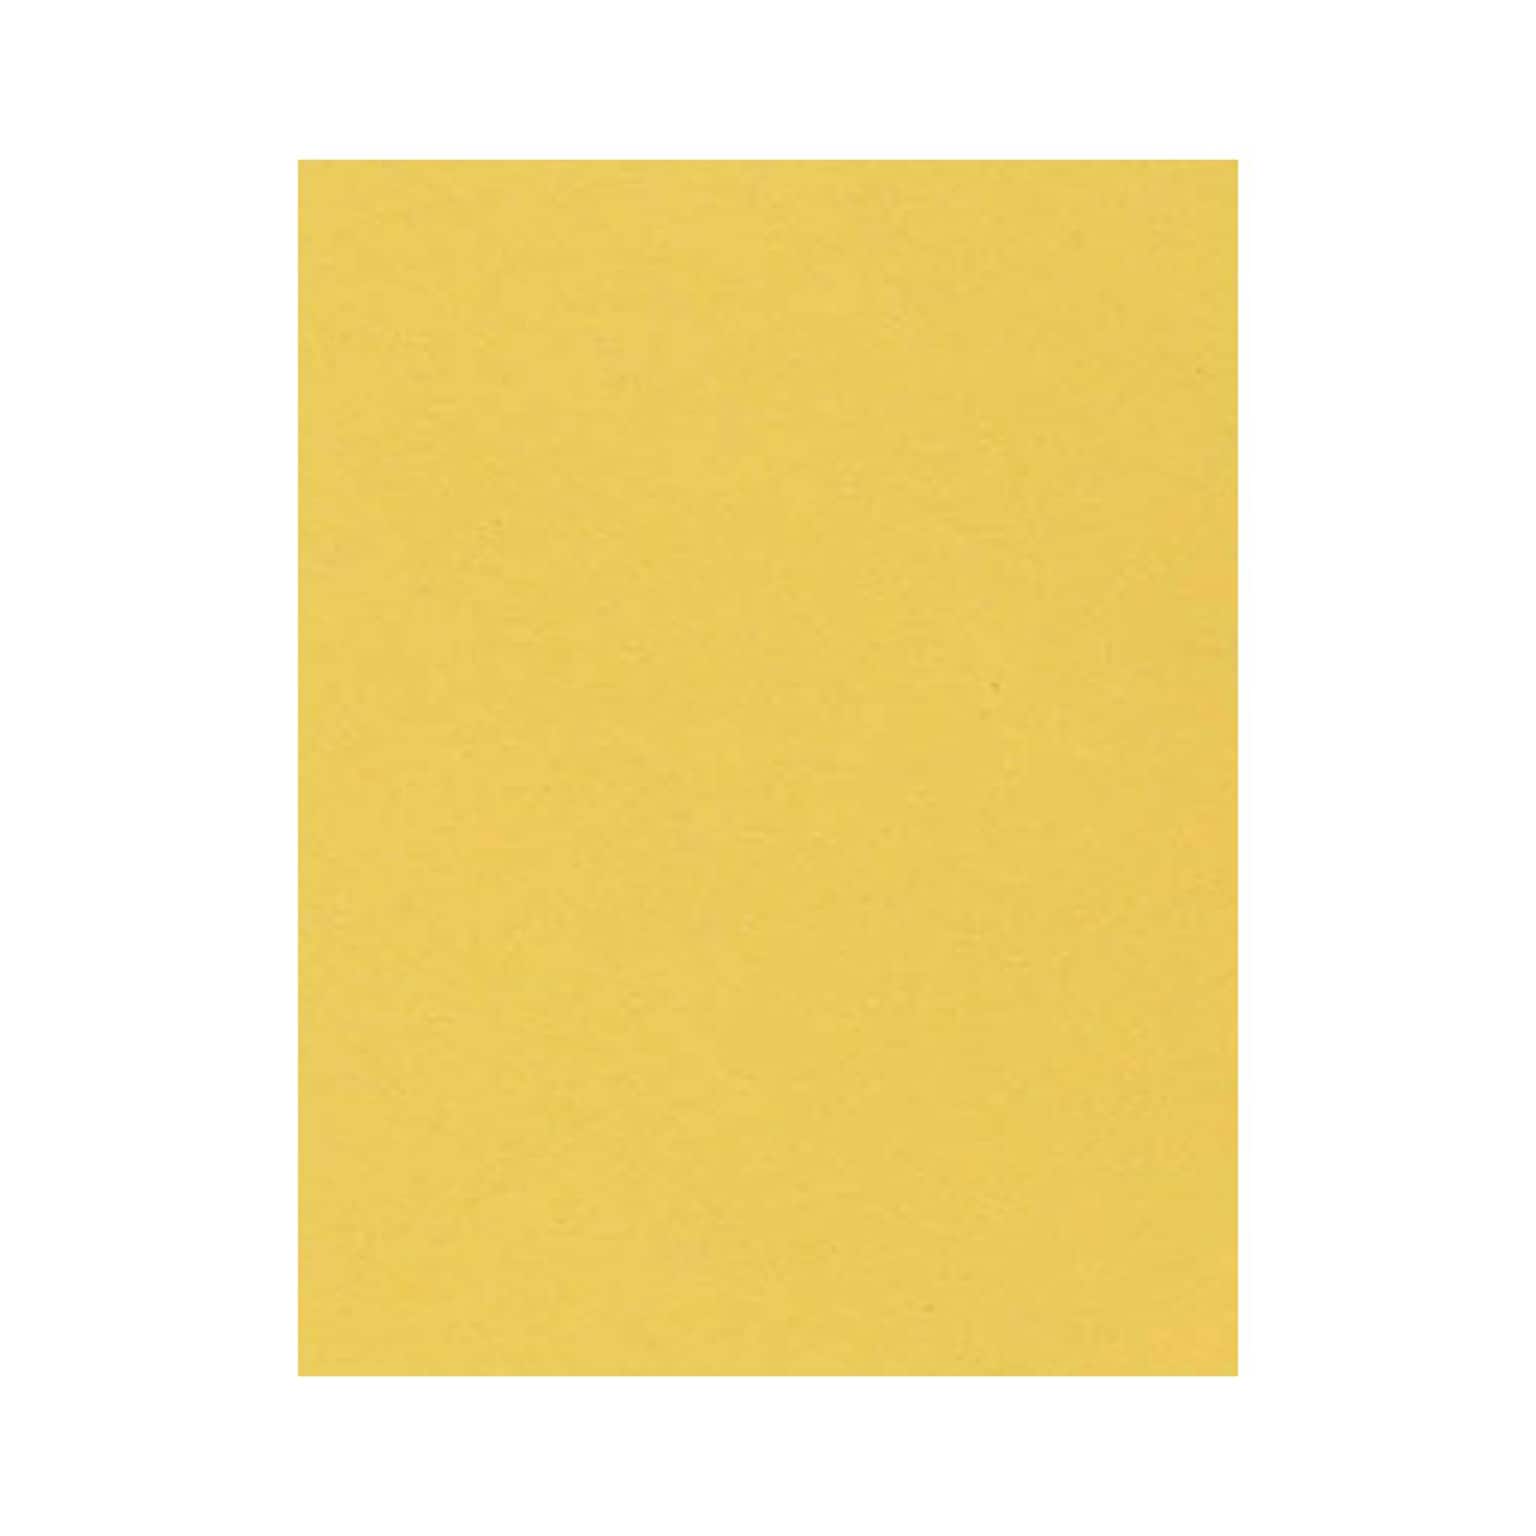 LUX 8.5 x 11Business Paper, 28 lbs., Goldenrod Yellow, 250 Sheets/Pack (81211-P-43-250)